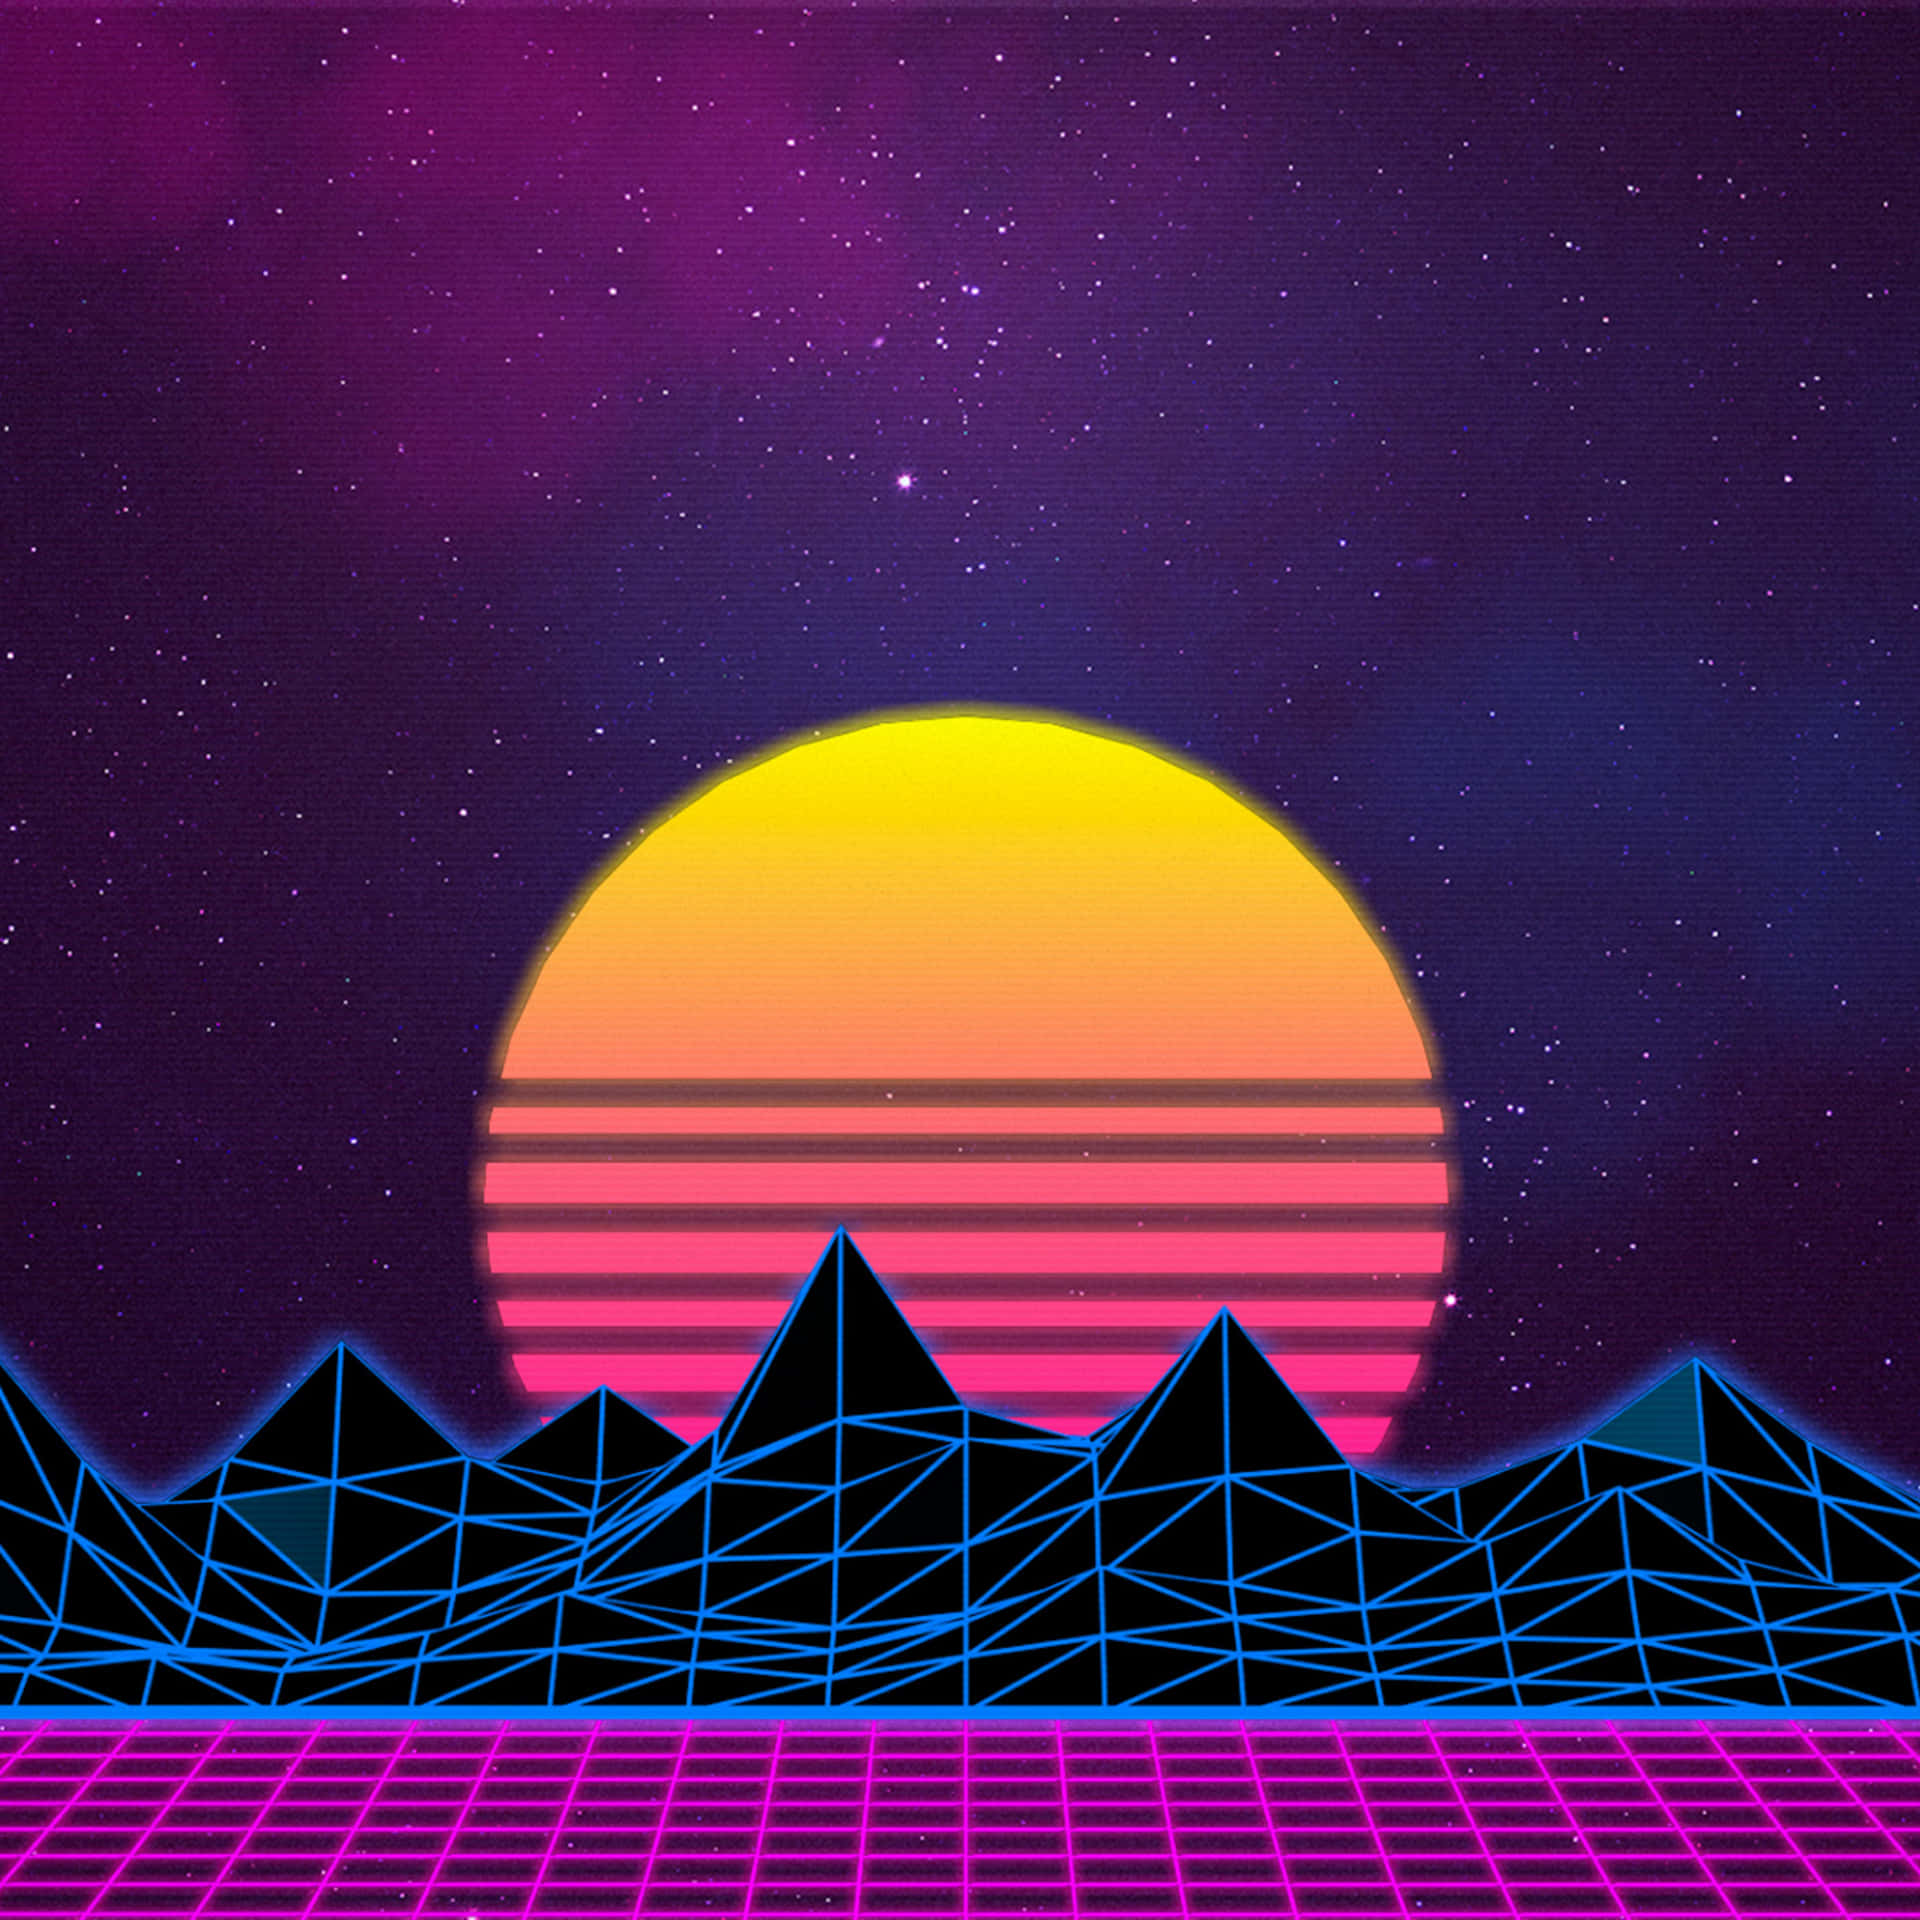 Cruise Through Cyber Space with Retro Wave Aesthetics